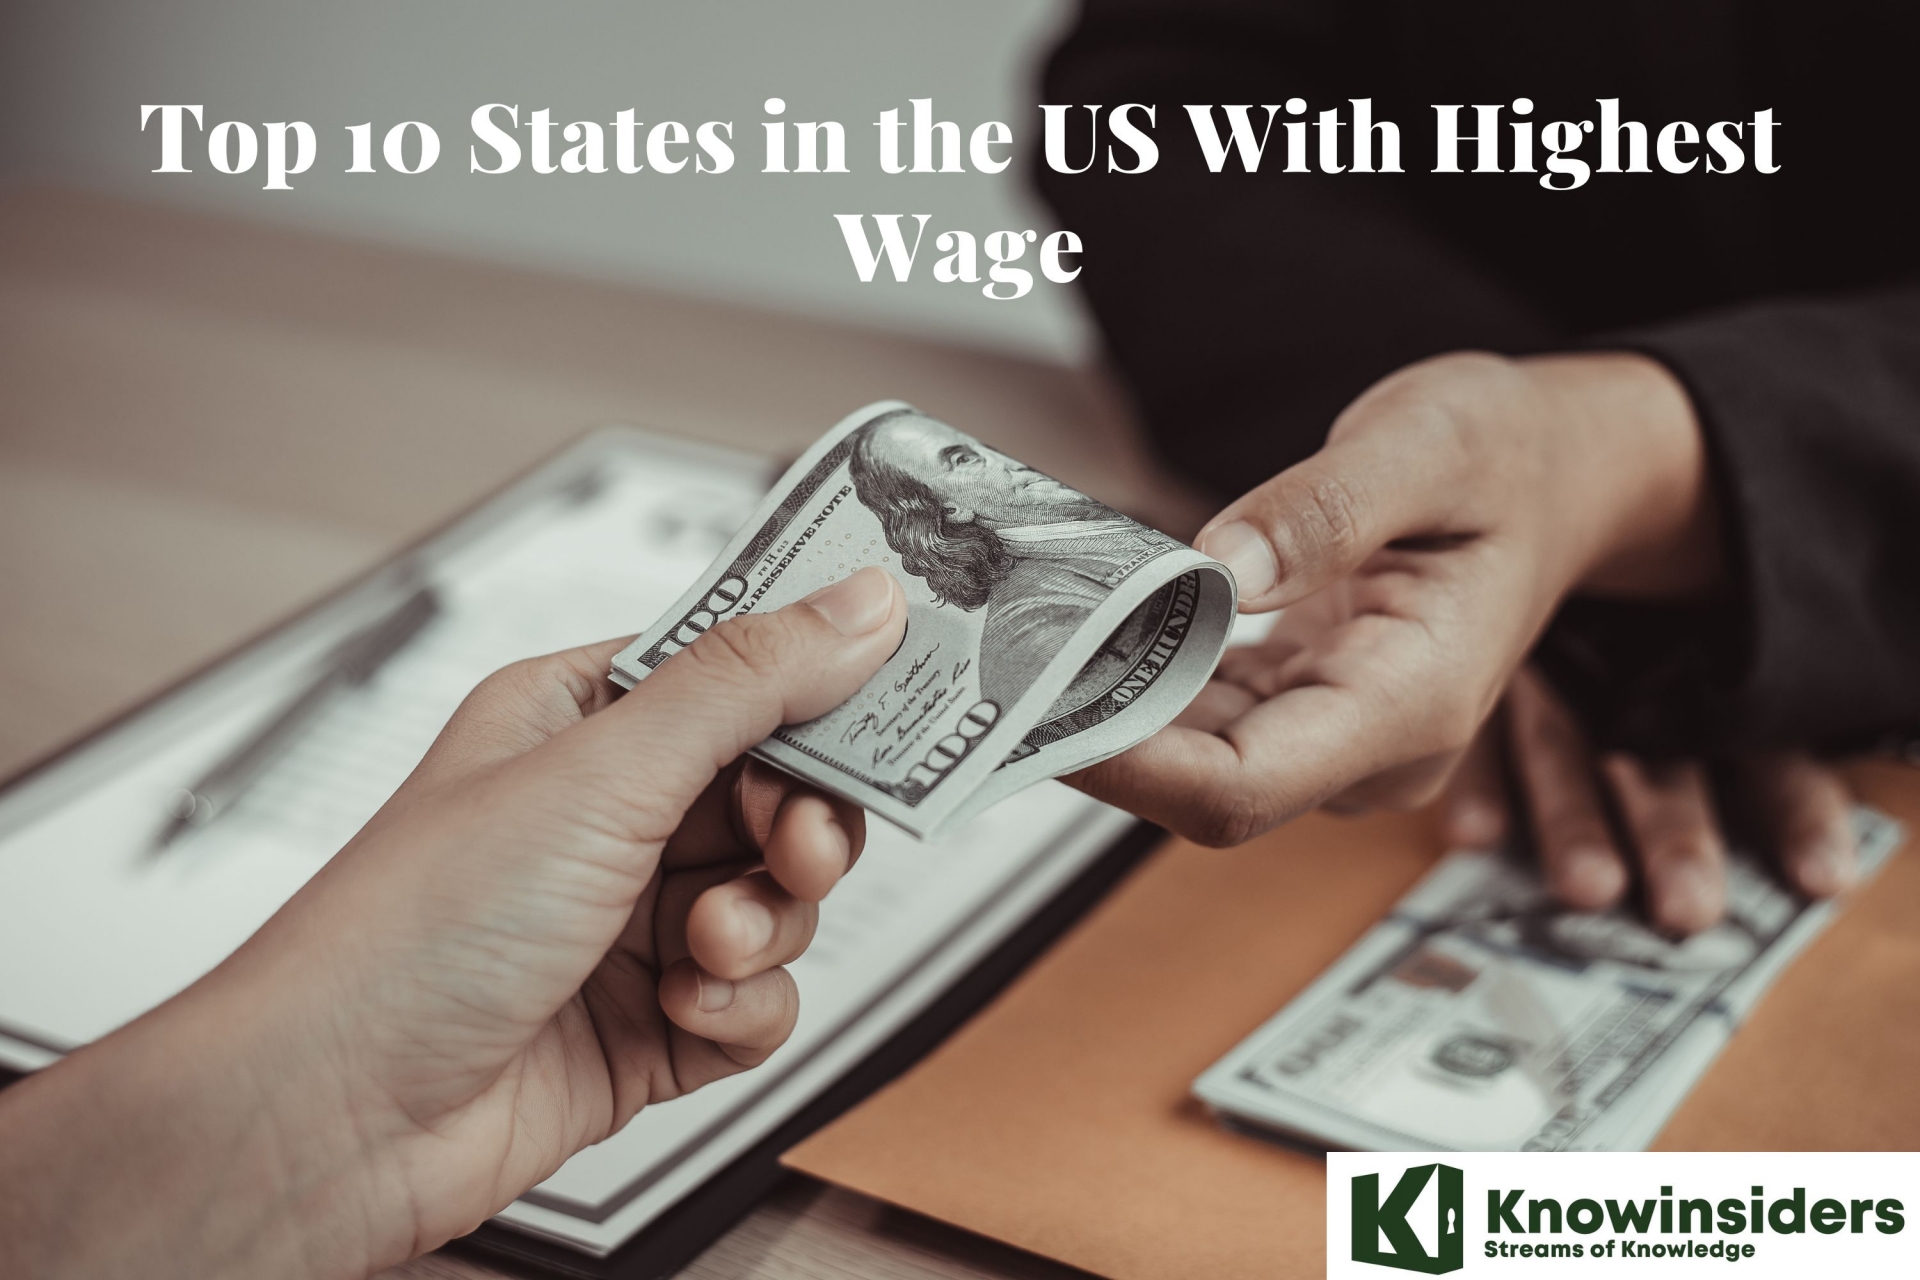 Top 10 States in the US With Highest Wage